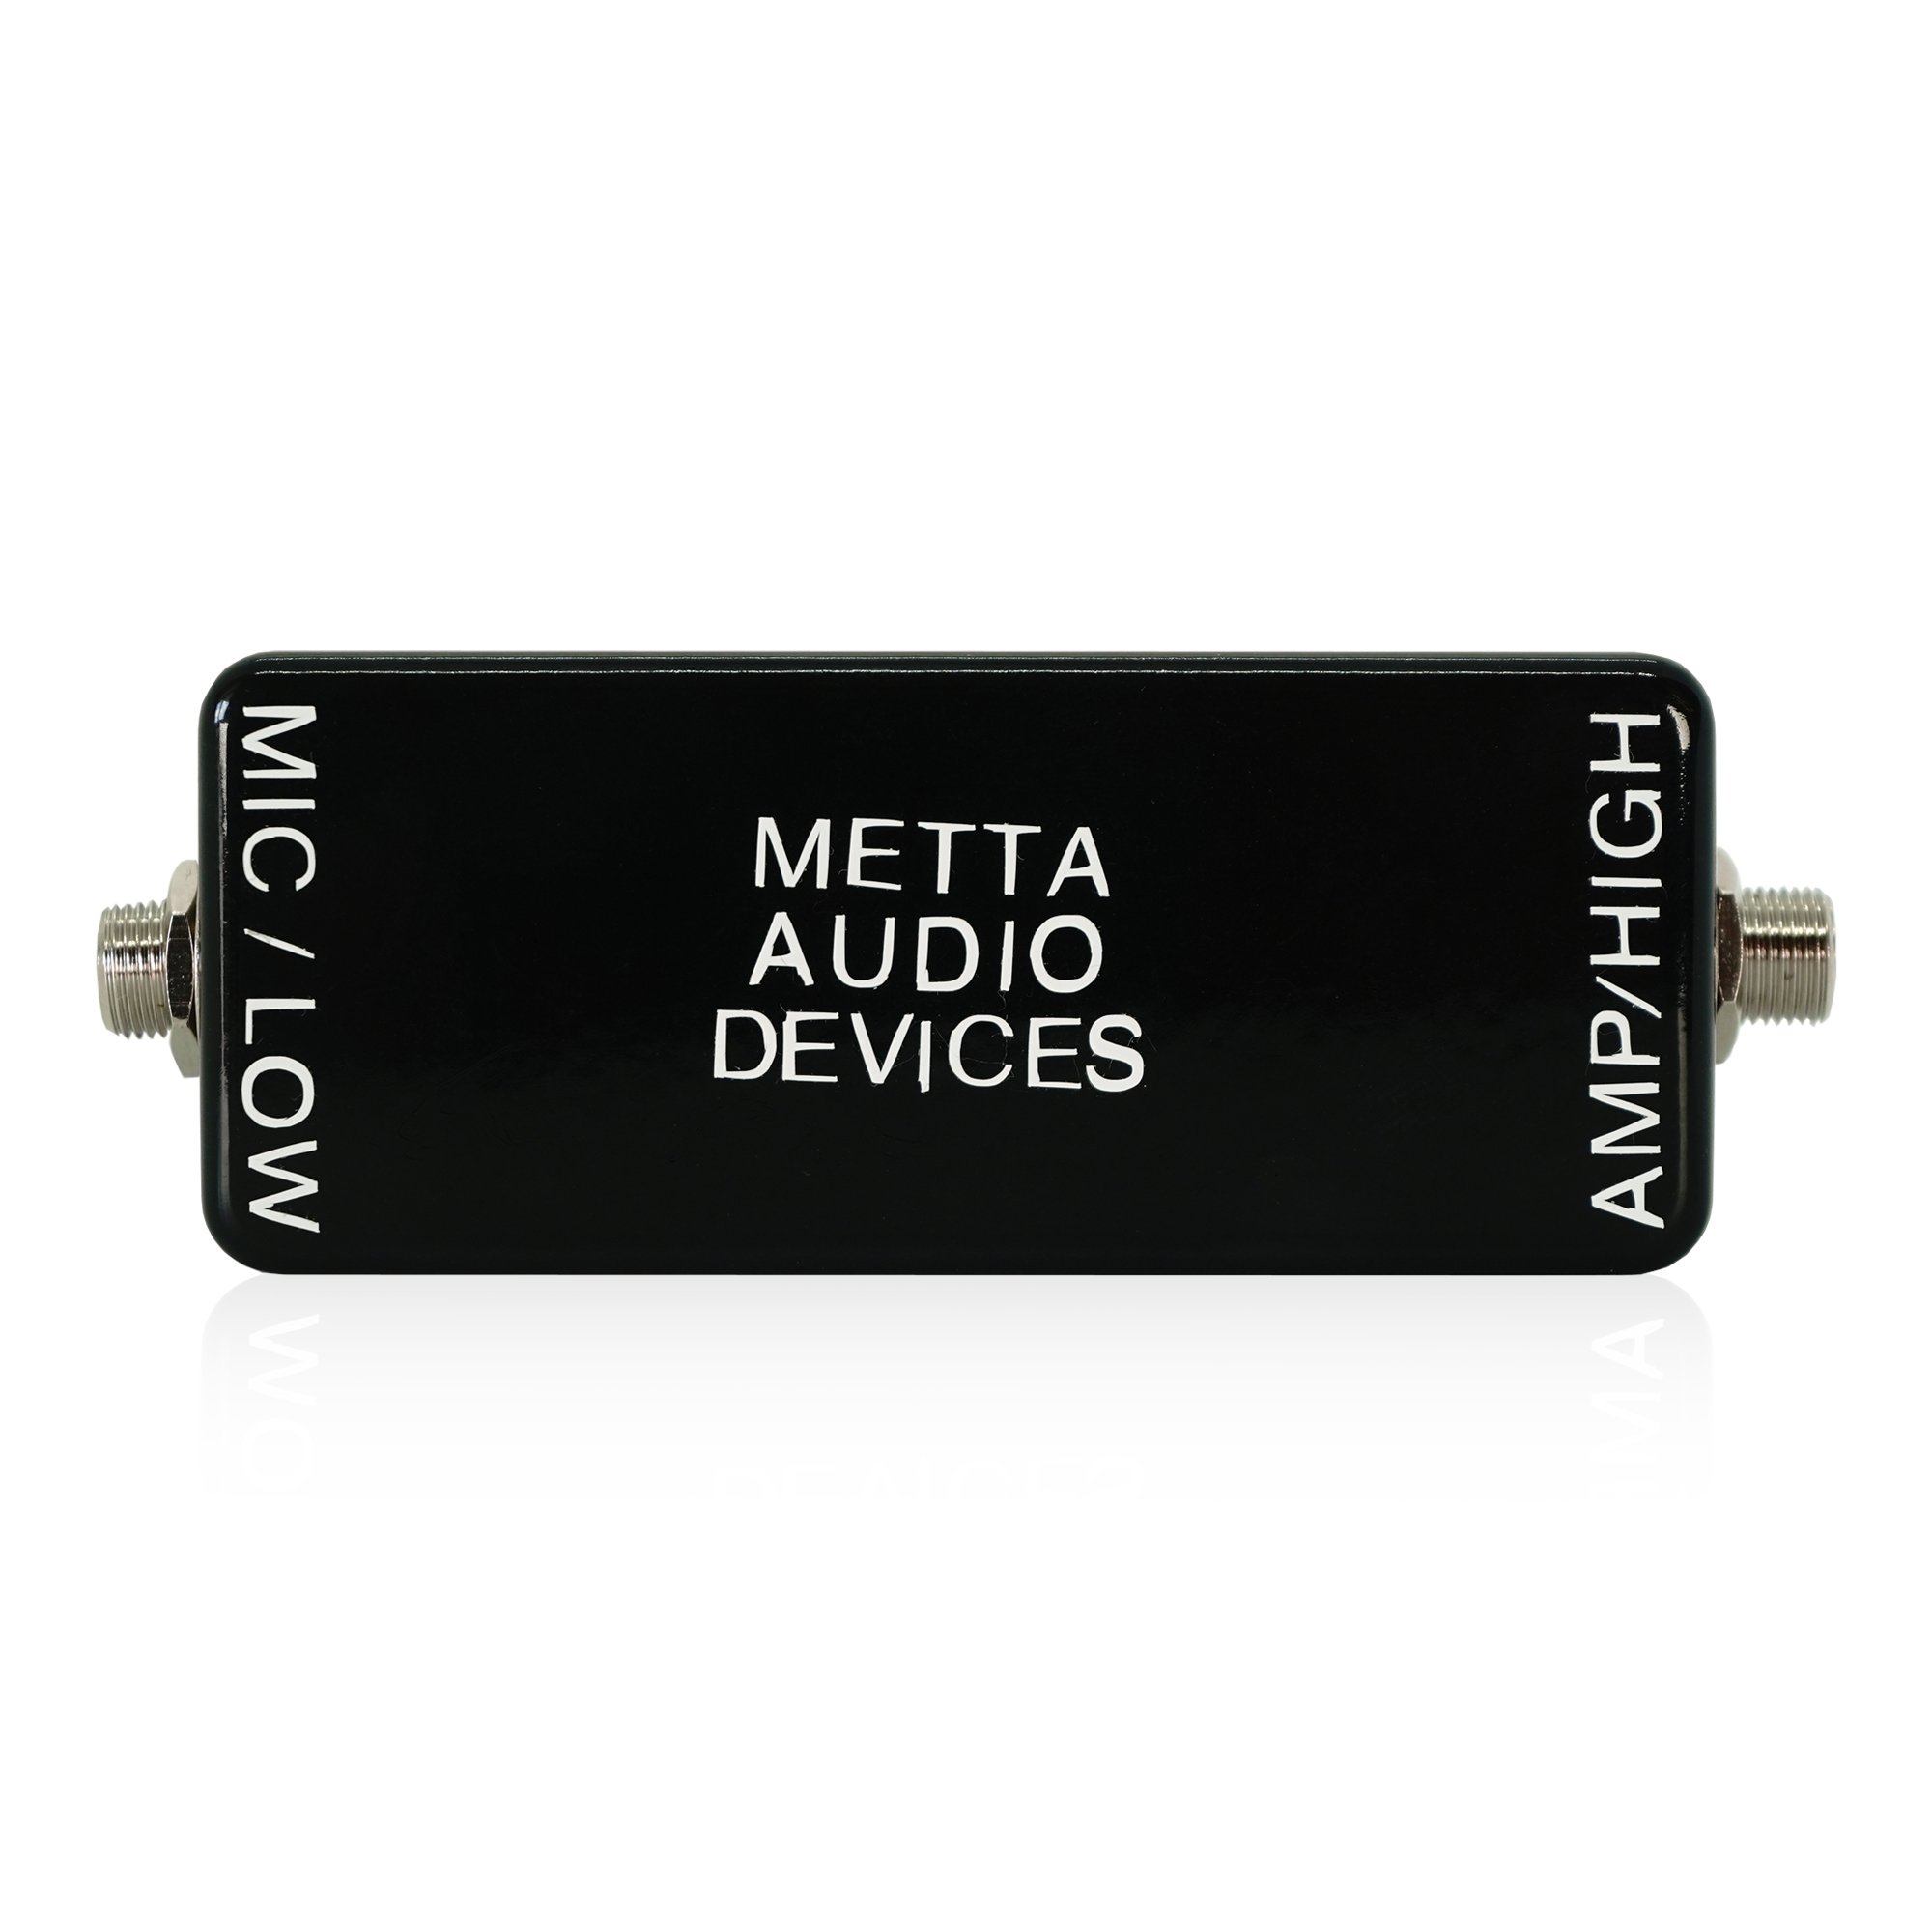 METTA AUDIO DEVICES / MICROPHONE TO AMP — LEP INTERNATIONAL